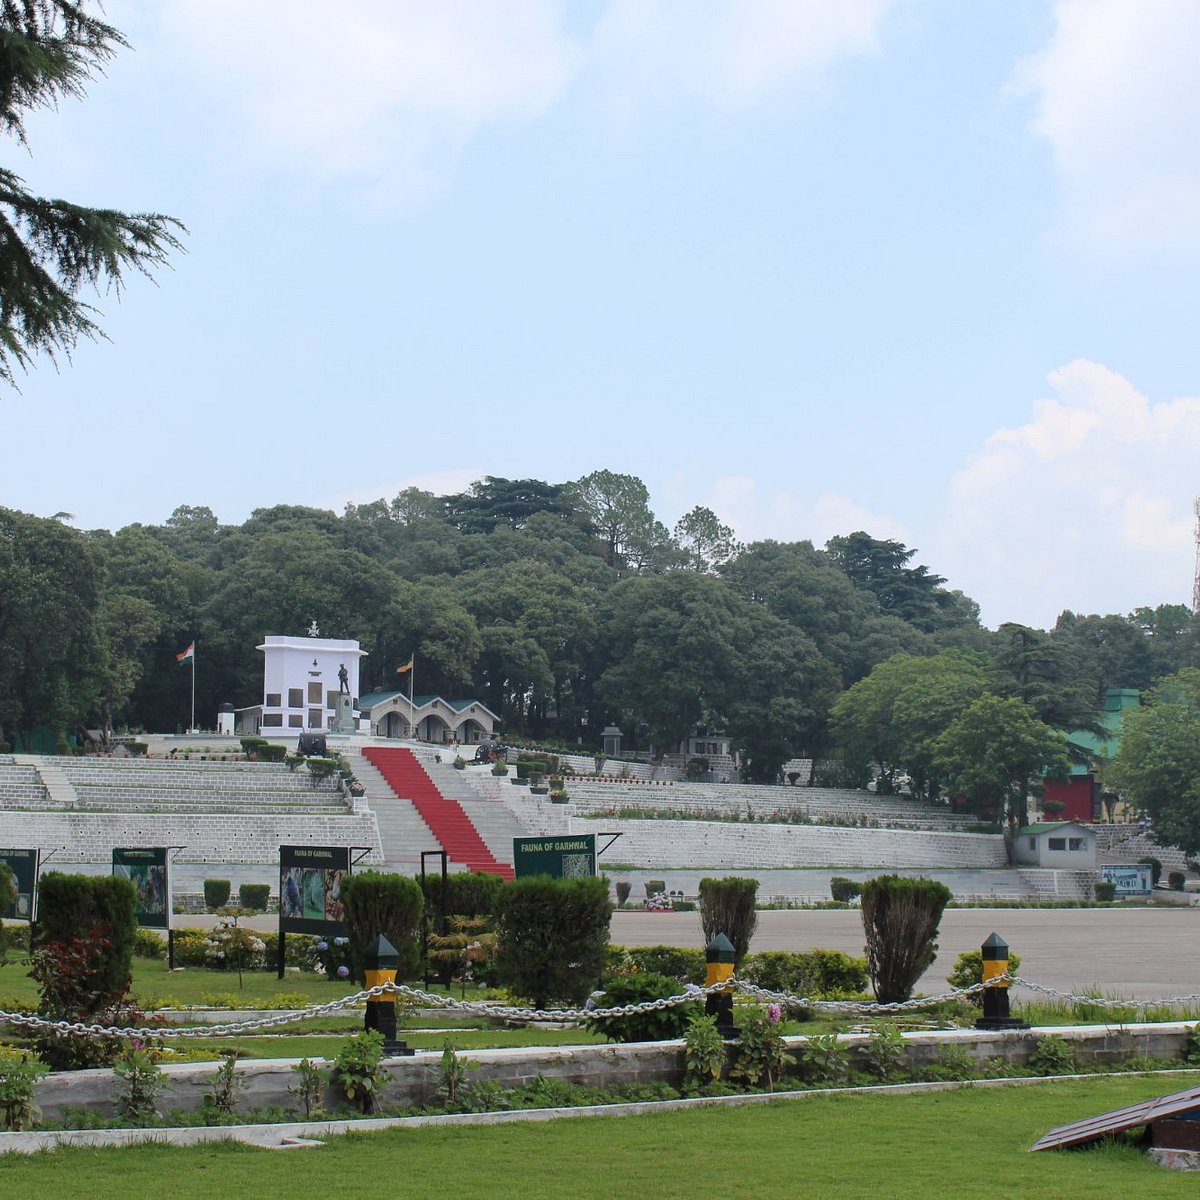 Known as the proud of Garhwal Rifles, War Memorial of Garhwal Rifles is the main attraction in Lansdowne contoment town. Garhwal Rifles War Memorial was established in 1923 by Lord Rawlinson of Trent (Commander in Chief, India). It is located at the Parade Ground in Lansdowne.